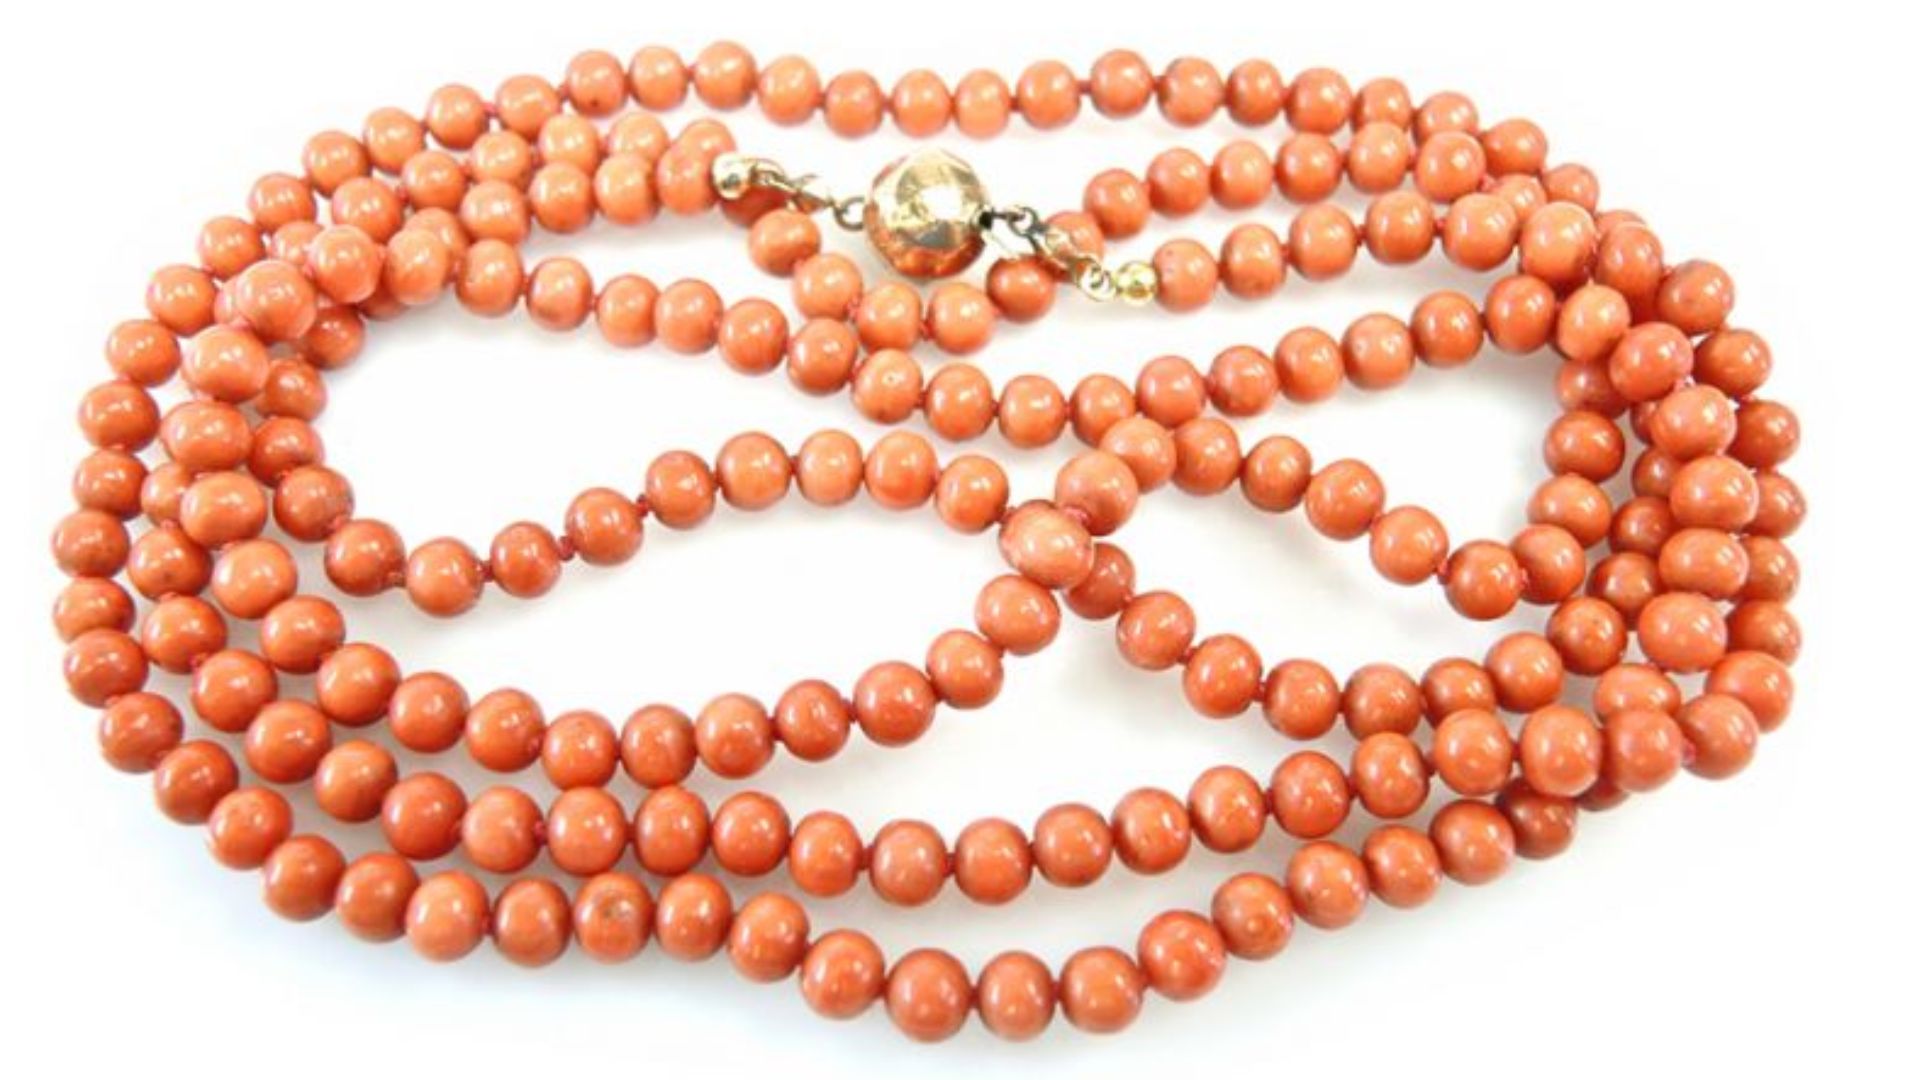 Coral Jewelry Made Up Of Beads